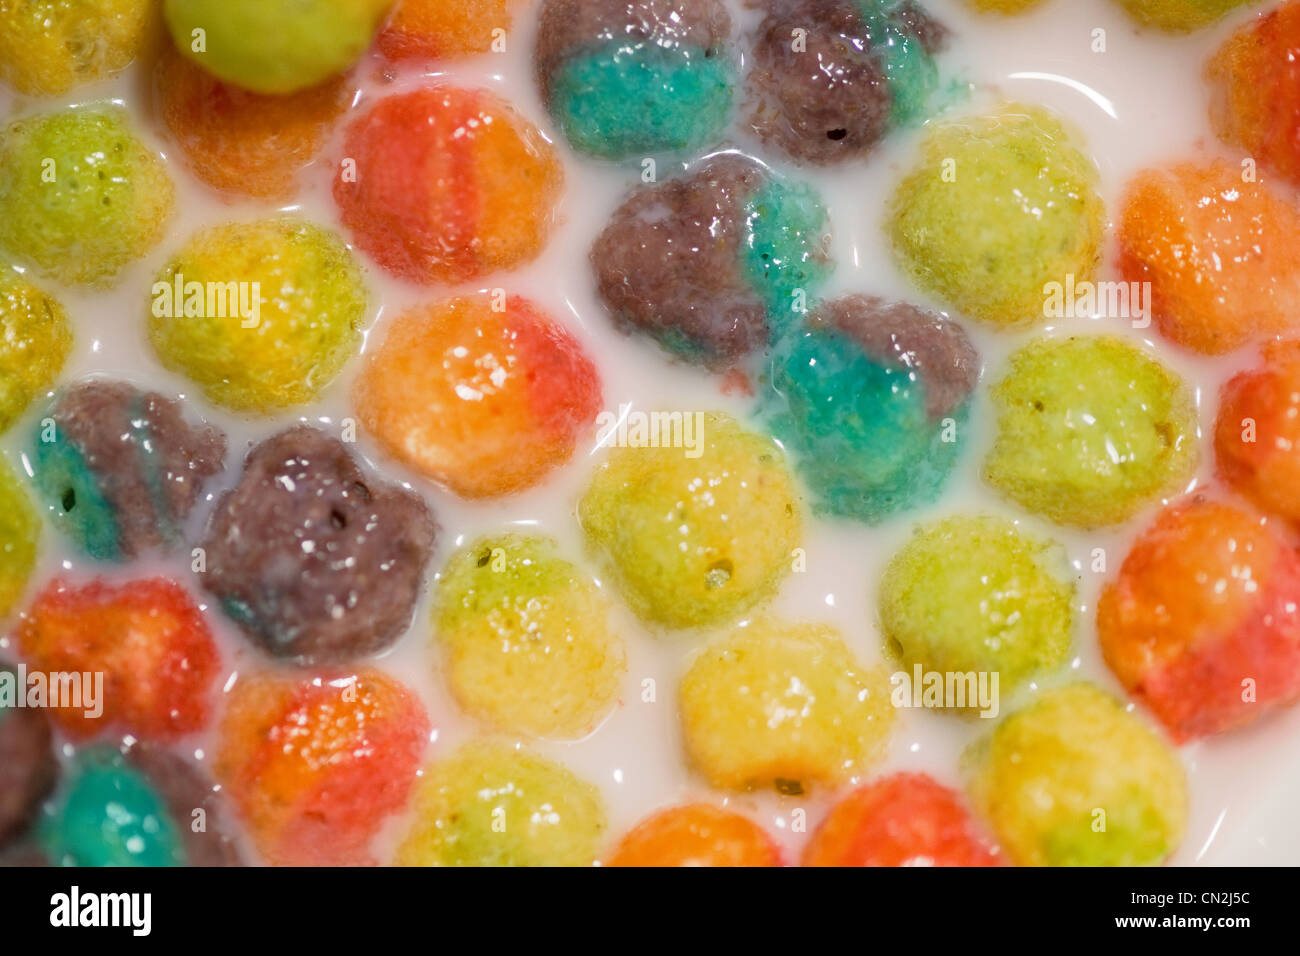 Colorful breakfast cereal, close up Stock Photo